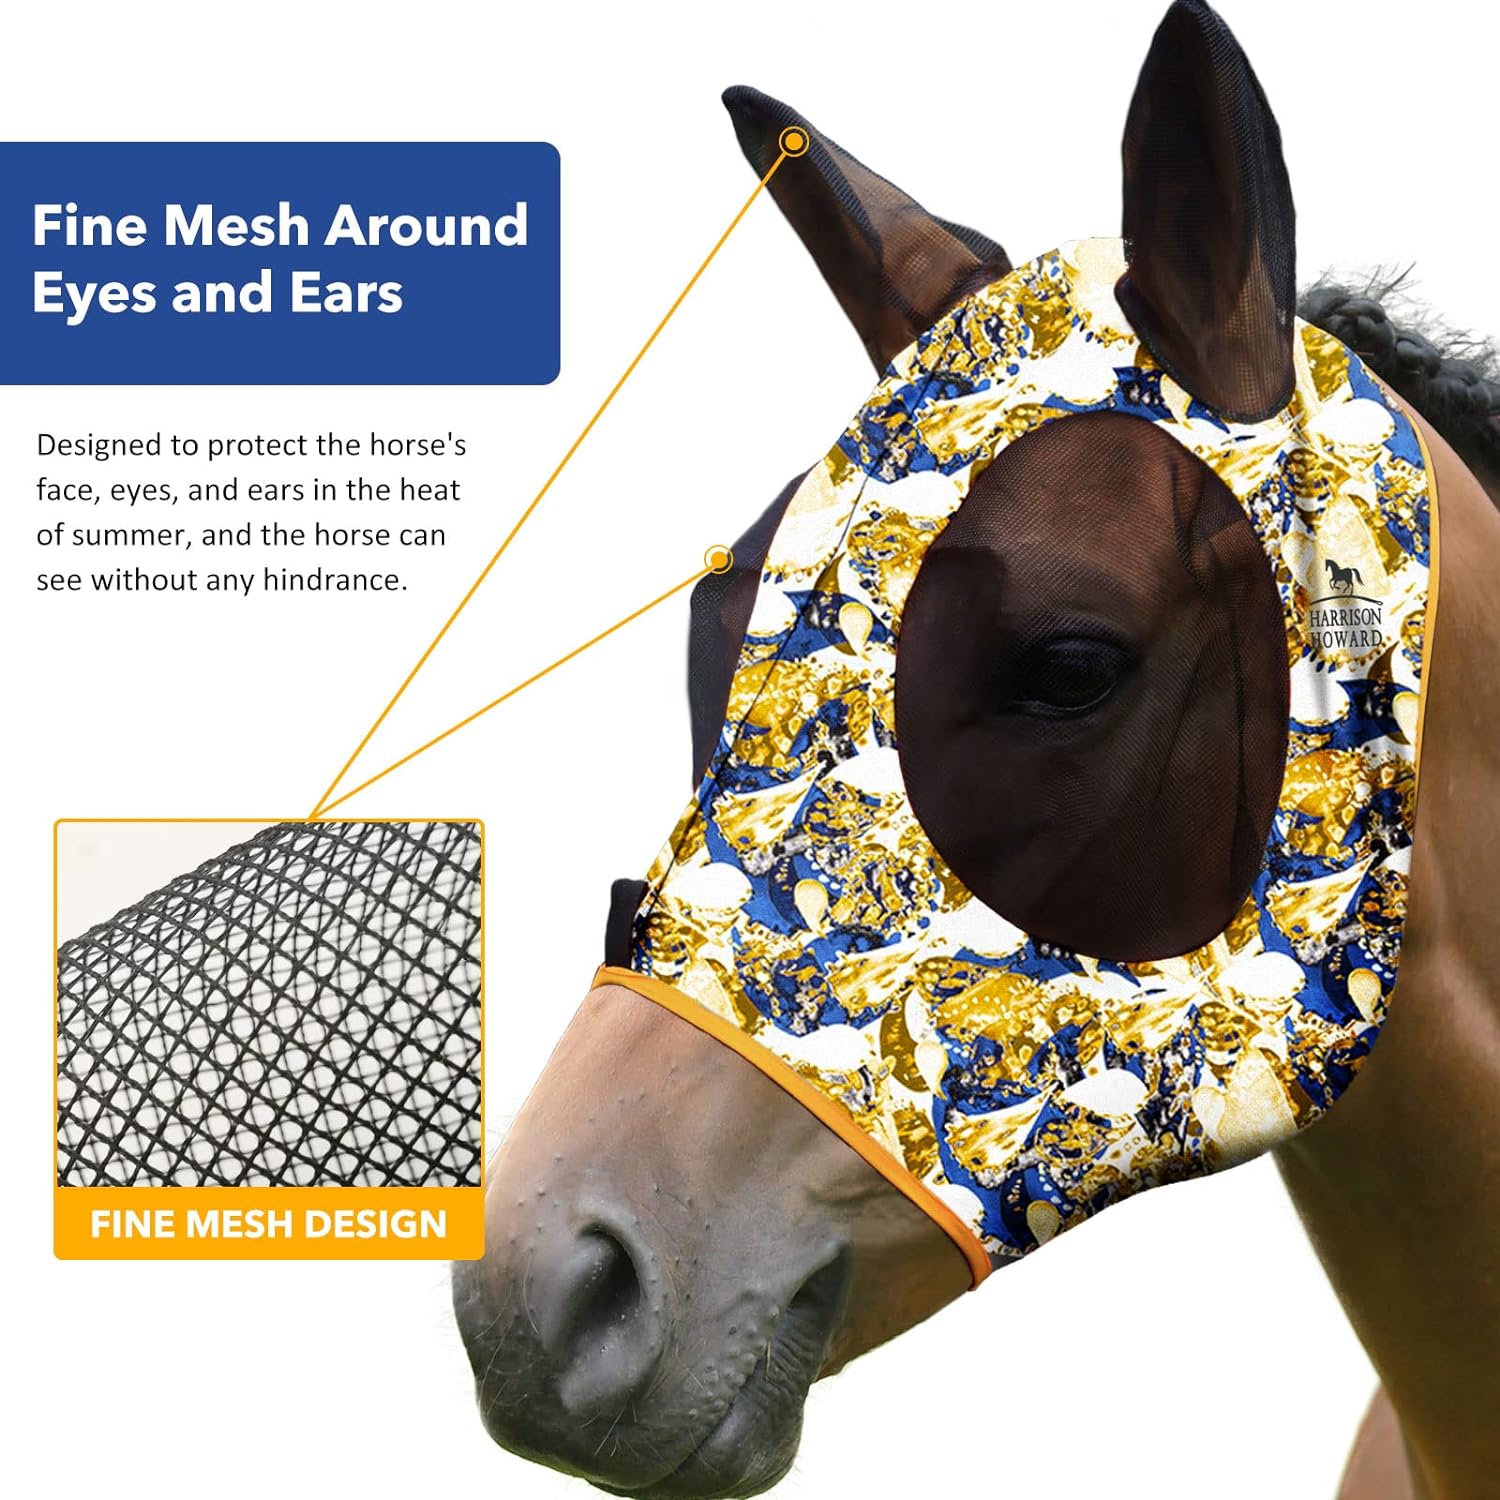 Harrison Howard CareMaster Horse Fly Mask Half Face Standard with Ears Fly Mask UV Protection for Horse Silver/Purple Retro